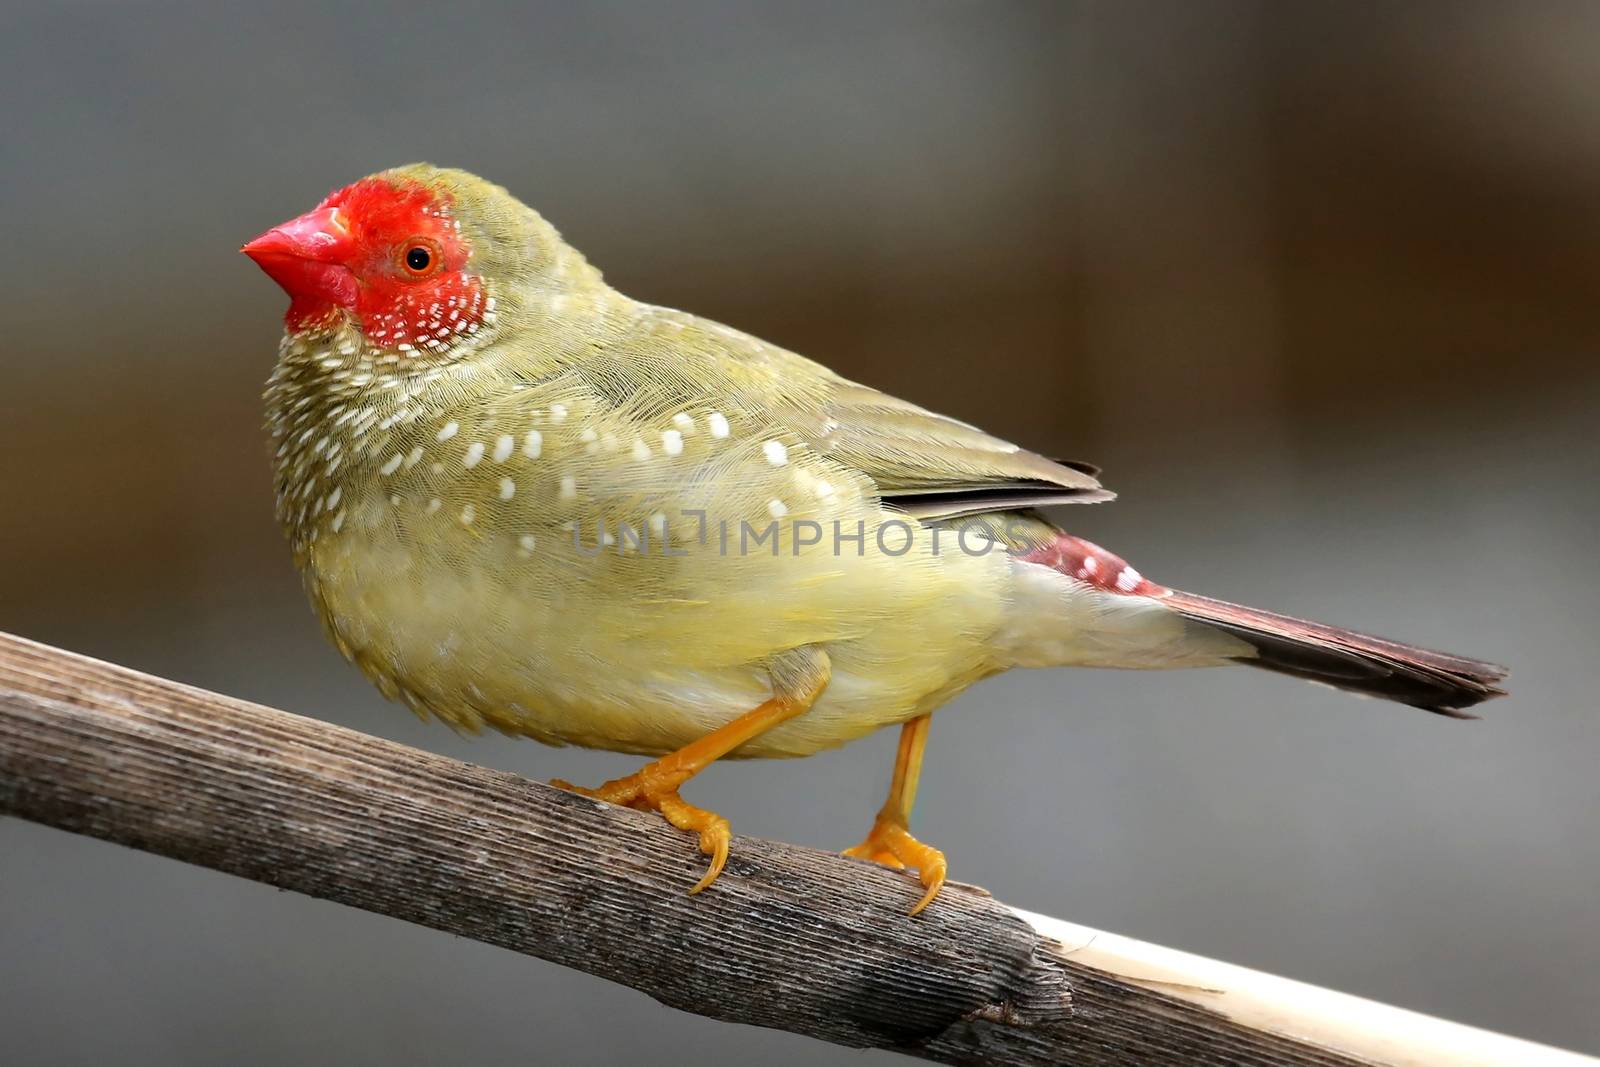 Beautiful male Star Fich from Australia with olve feathers and red head